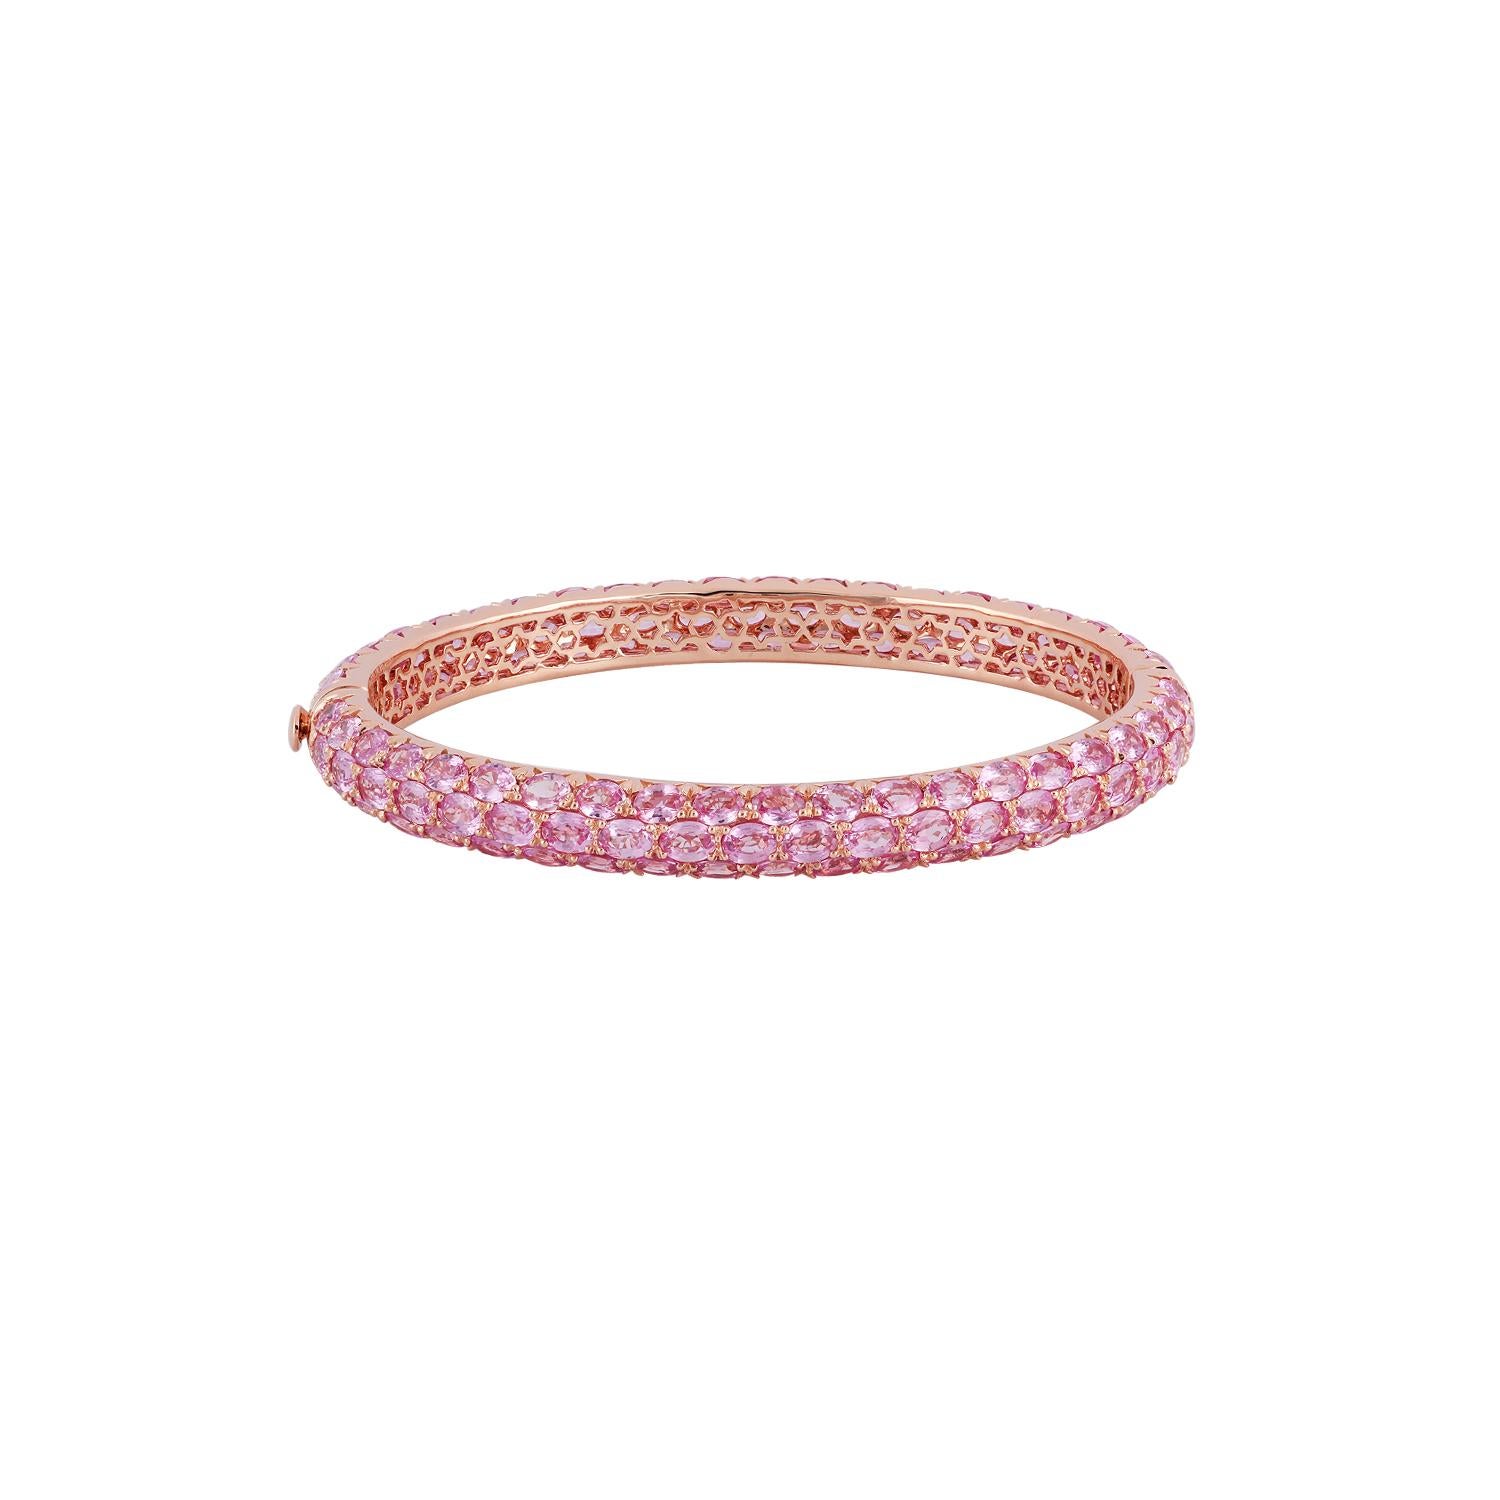 This is an exclusive bangle studded in 18K rose gold, features 124 pieces of oval-shaped pink sapphires weight 22.87 carats & 18K rose gold weight 21.65 grams. This is an elegant bangle to wear.